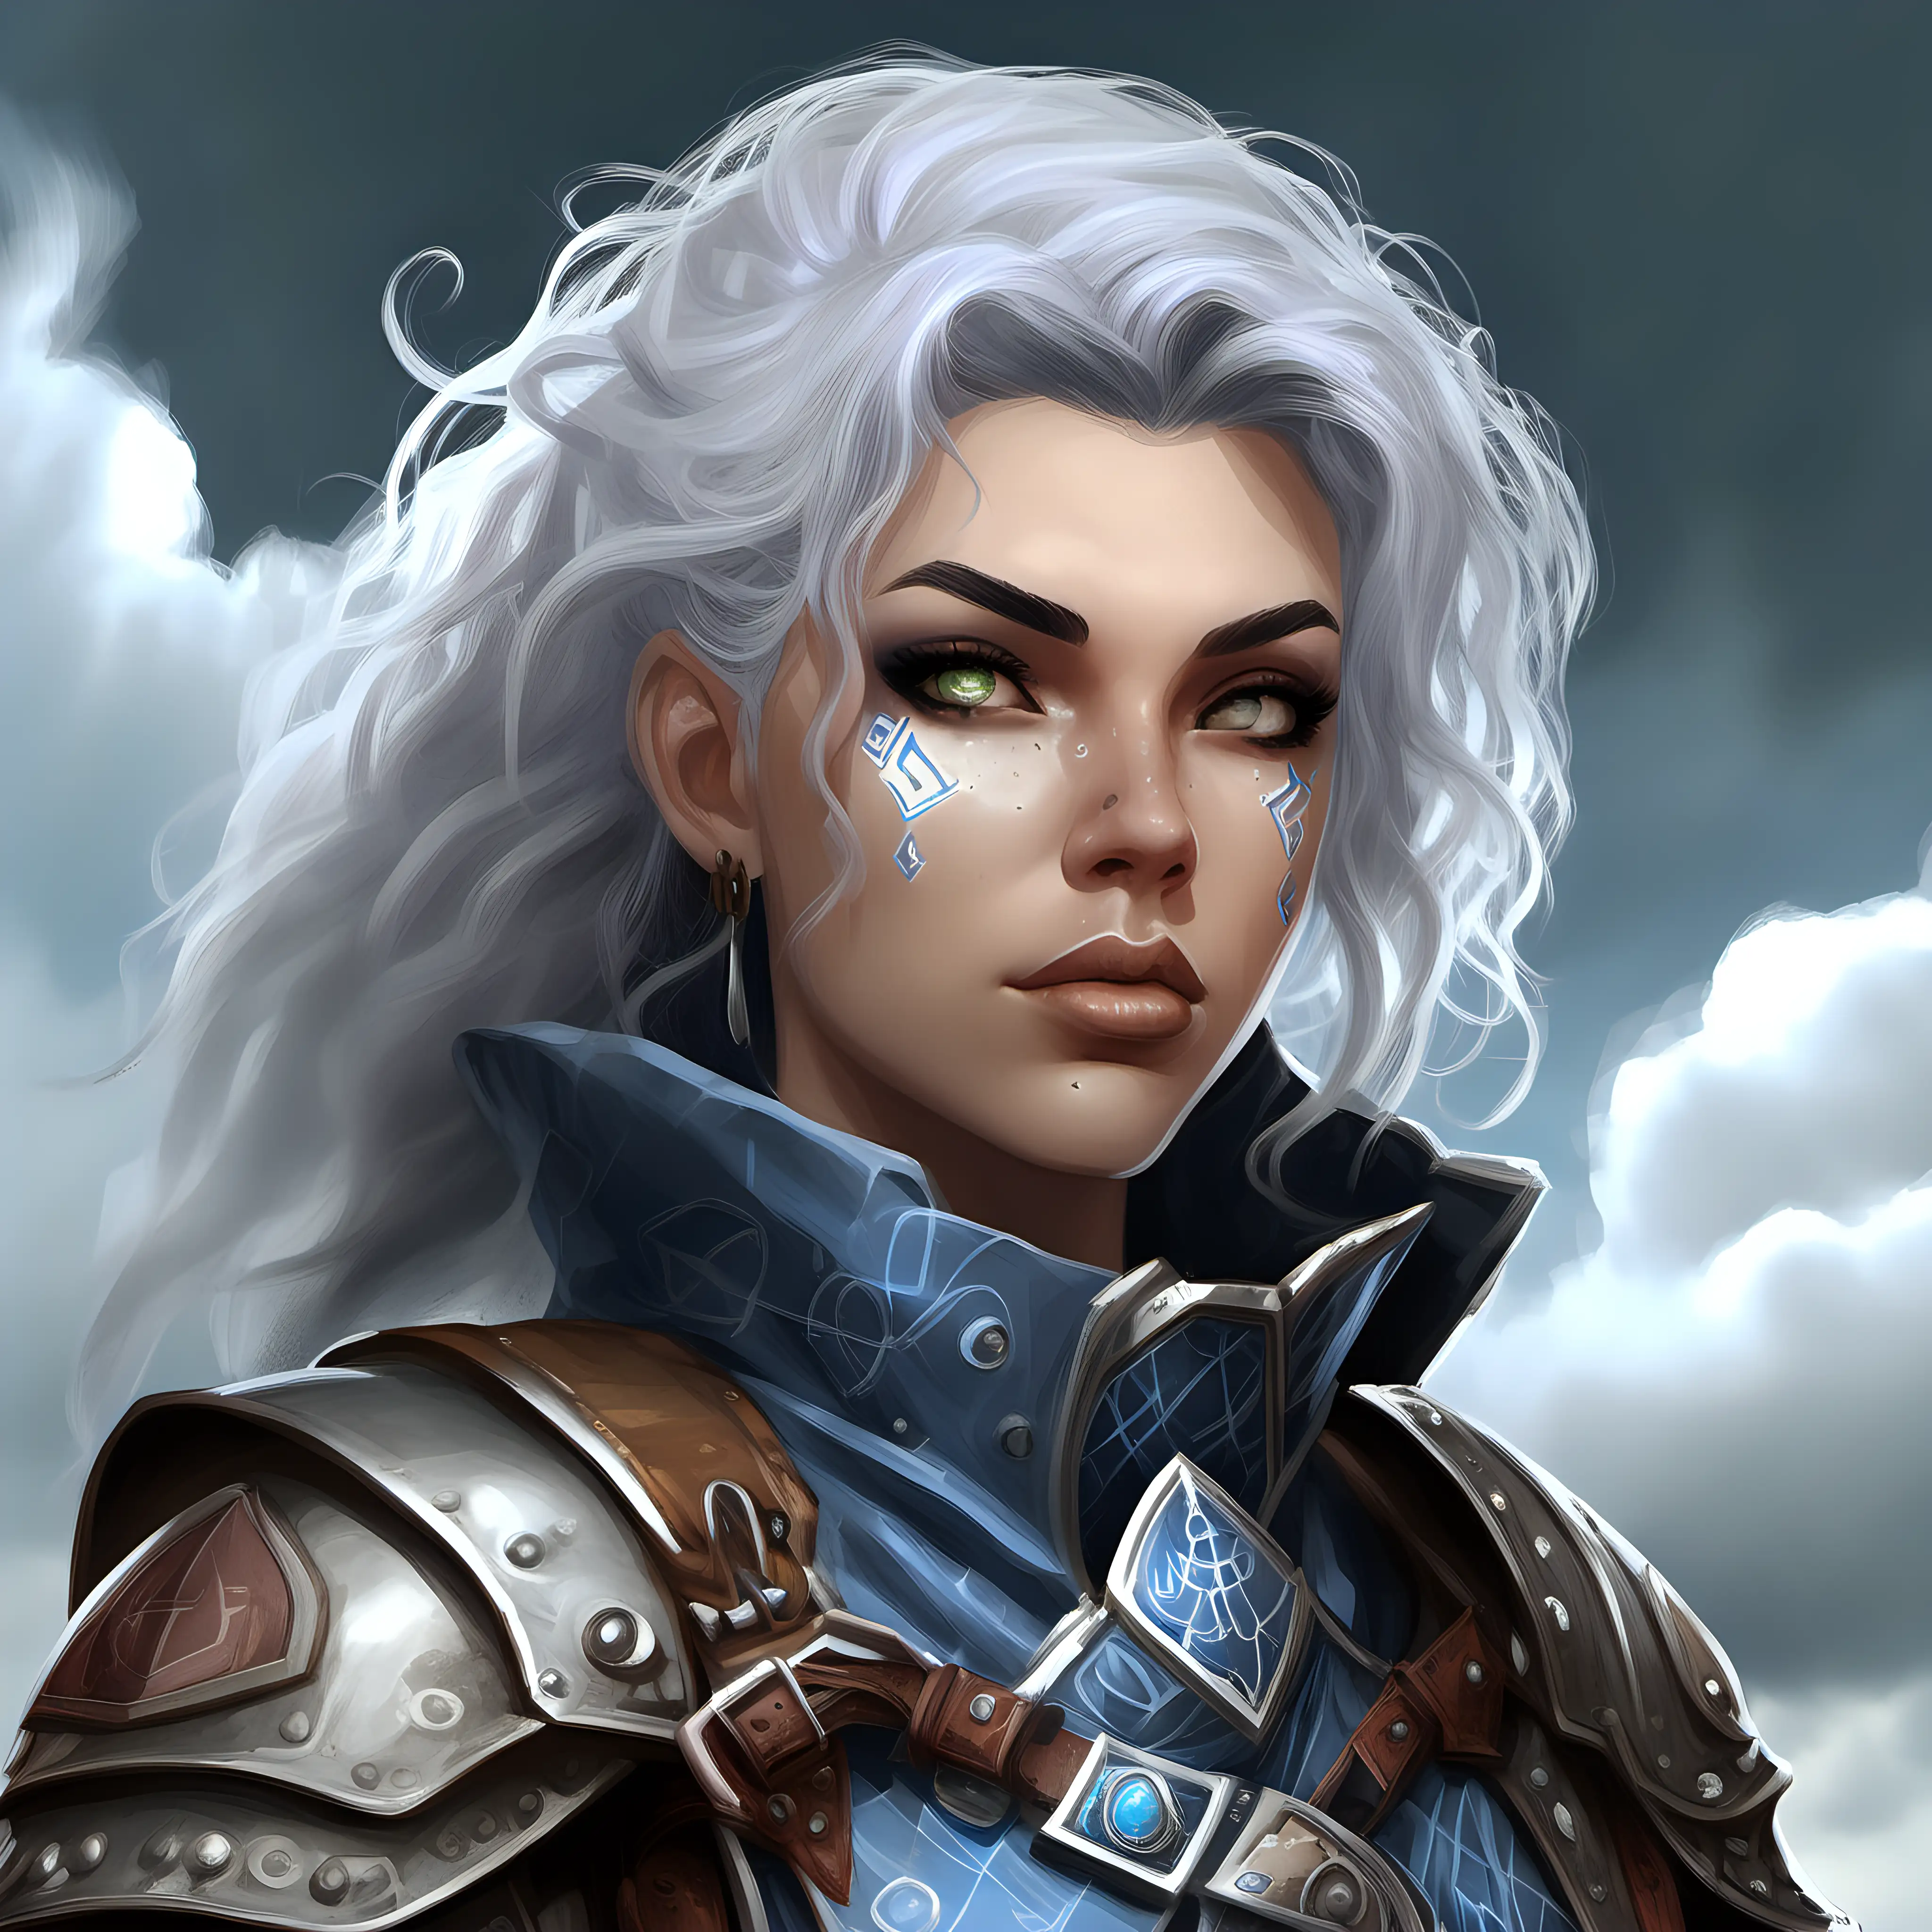 Young woman portrait dnd tempest cleric storm sorcerer
her glaze is serious and made the observer upset. her hair is gray, almost white. Clear eyes.
 she has a small birthmark on the neck 
She is wearing a plate armor decorated with clouds and runes, a small backpack, a belt with tons of pockets and few tools.
